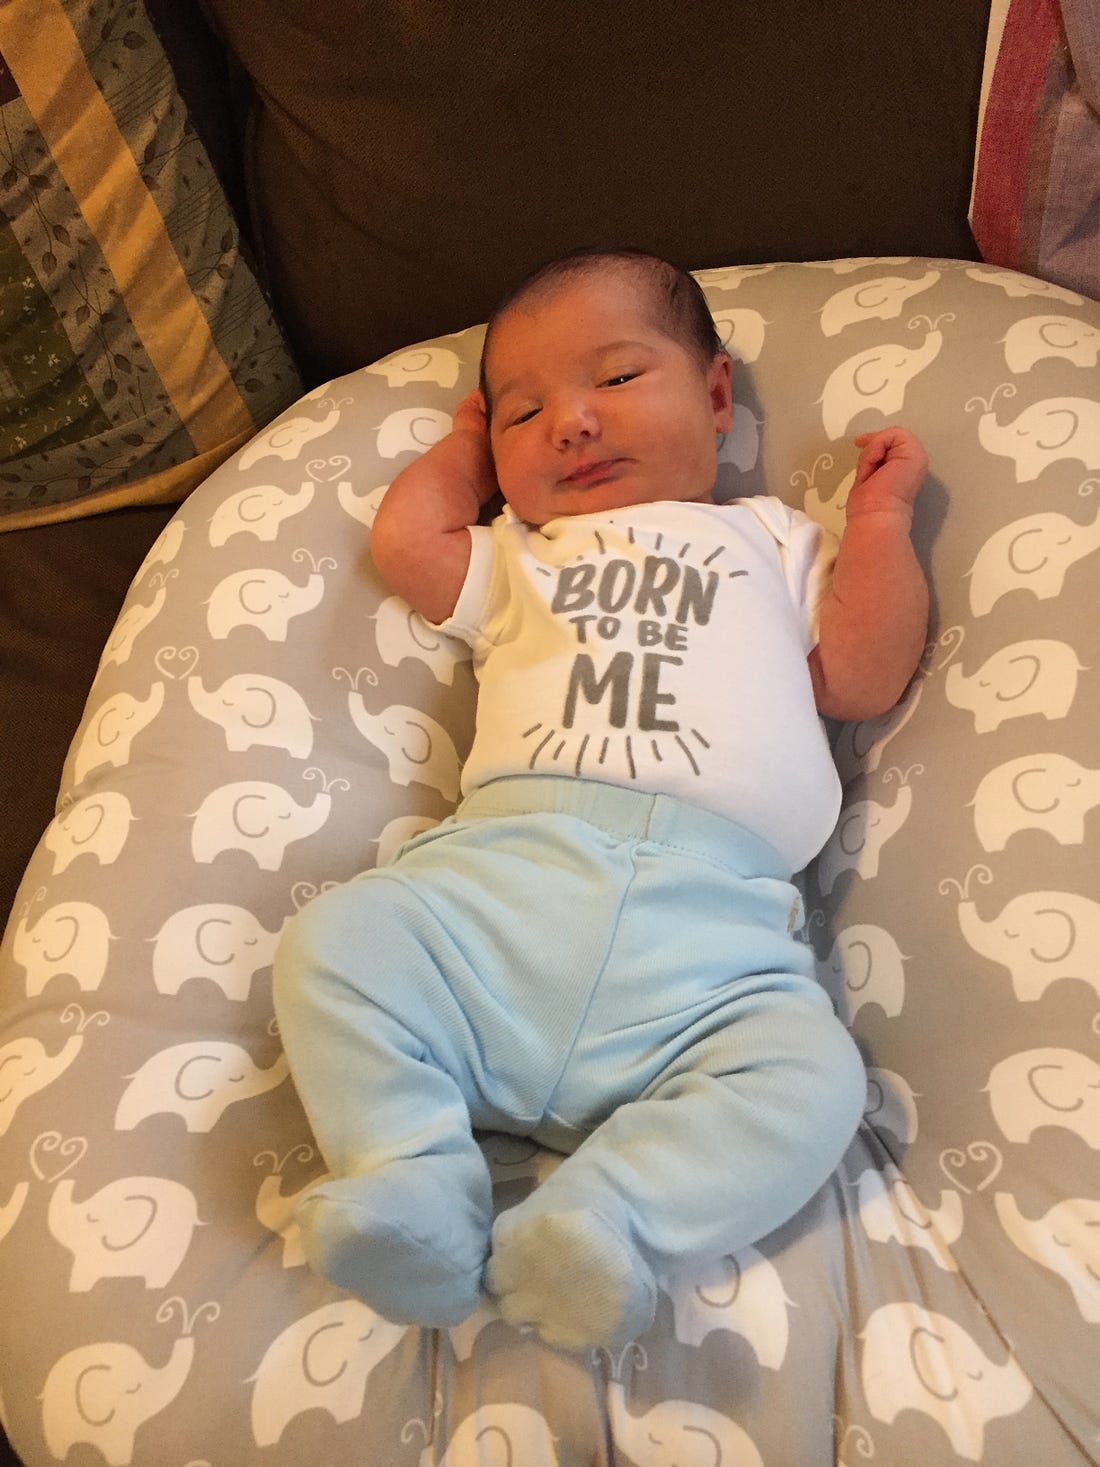 Photo of Lila on a pillow wearing a shirt that says "born to be me".